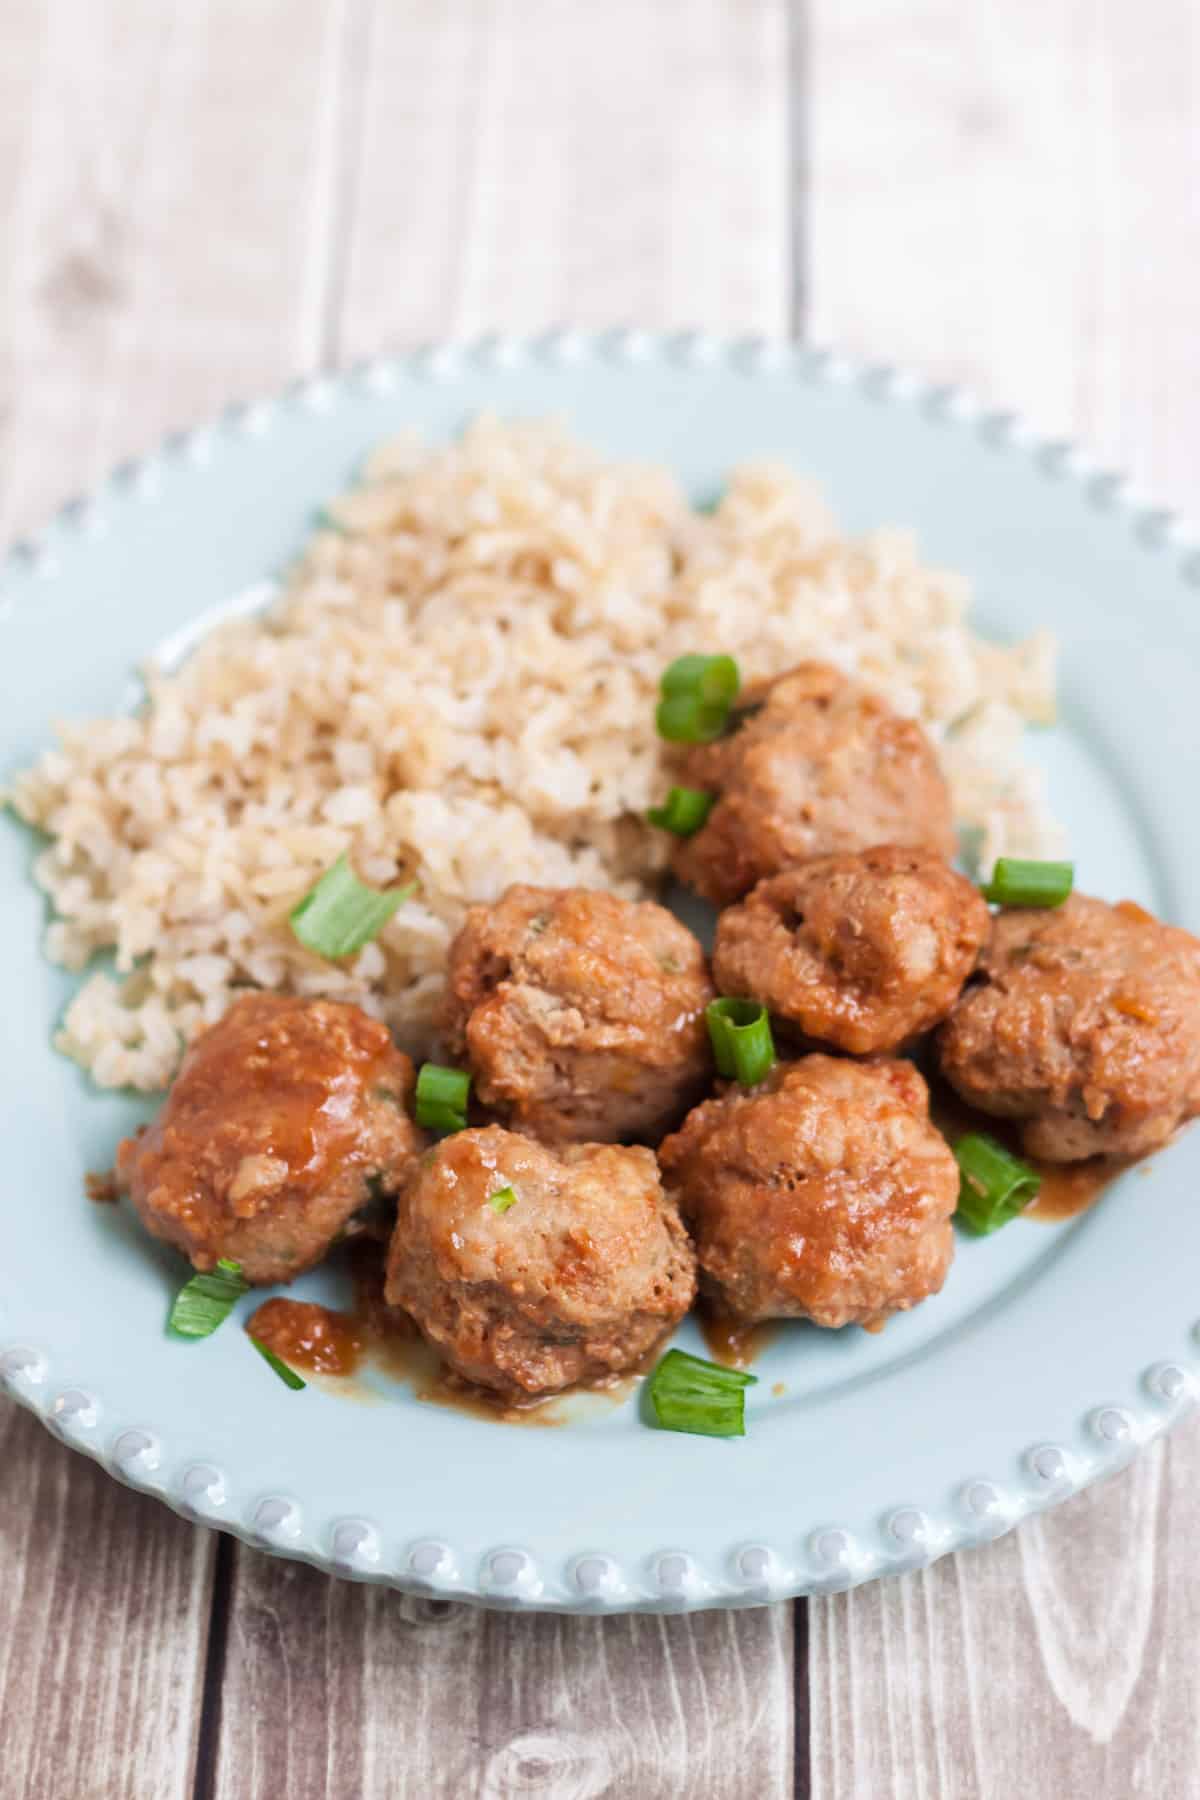 Ground turkey meatballs with peach ginger sauce and brown rice garnished with green onions all on a blue plate.